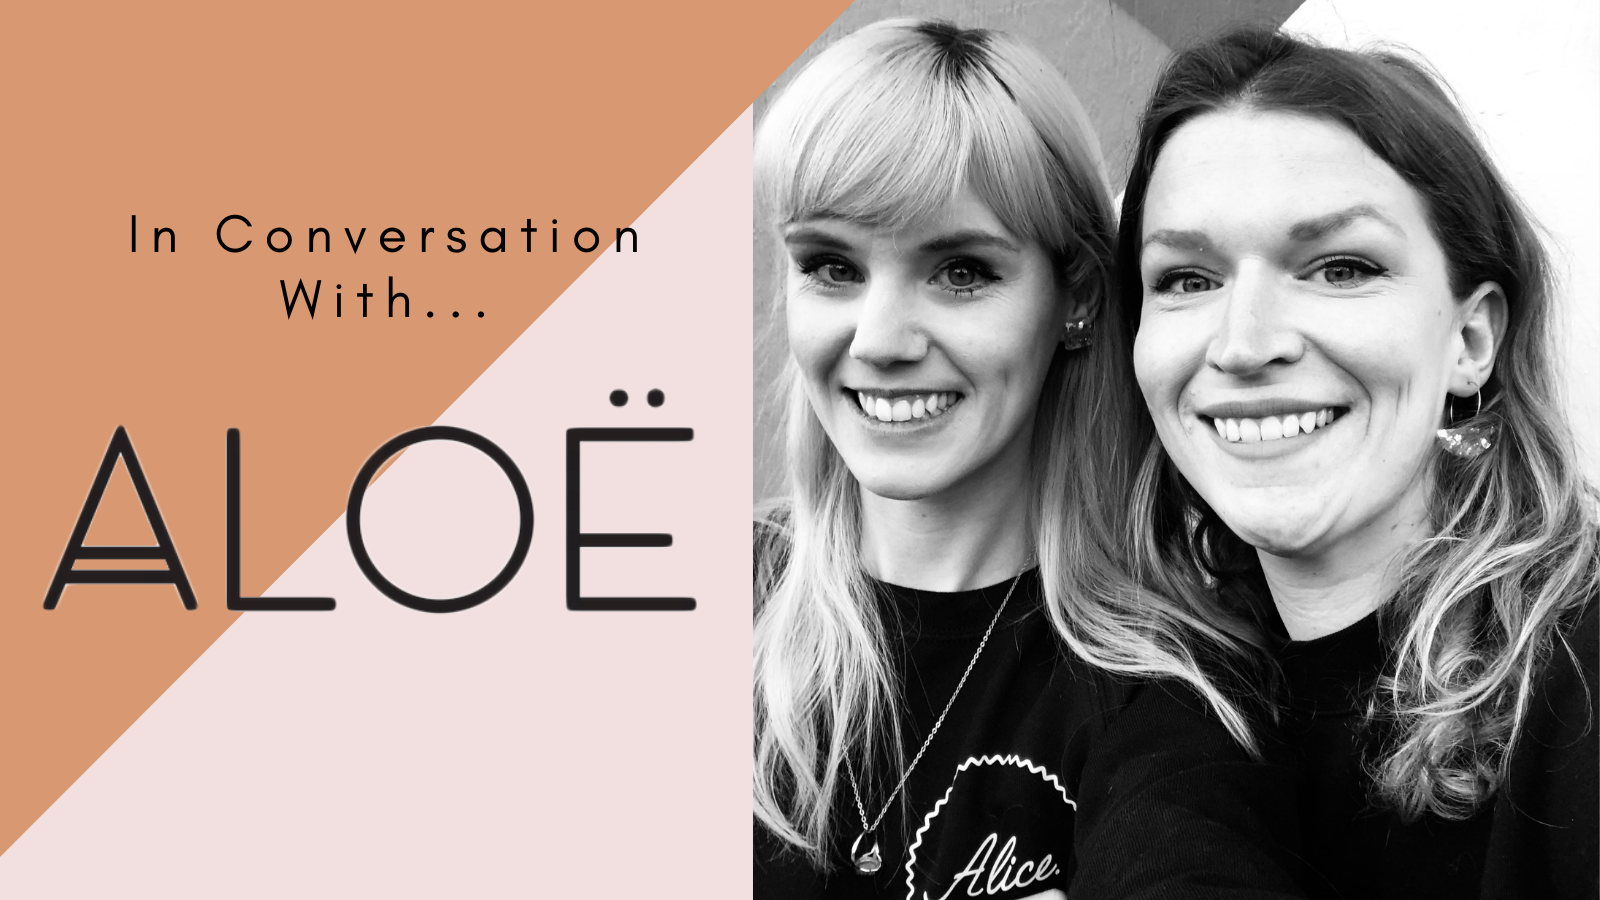 In Conversation With Alice & Chloe from Aloë Earrings